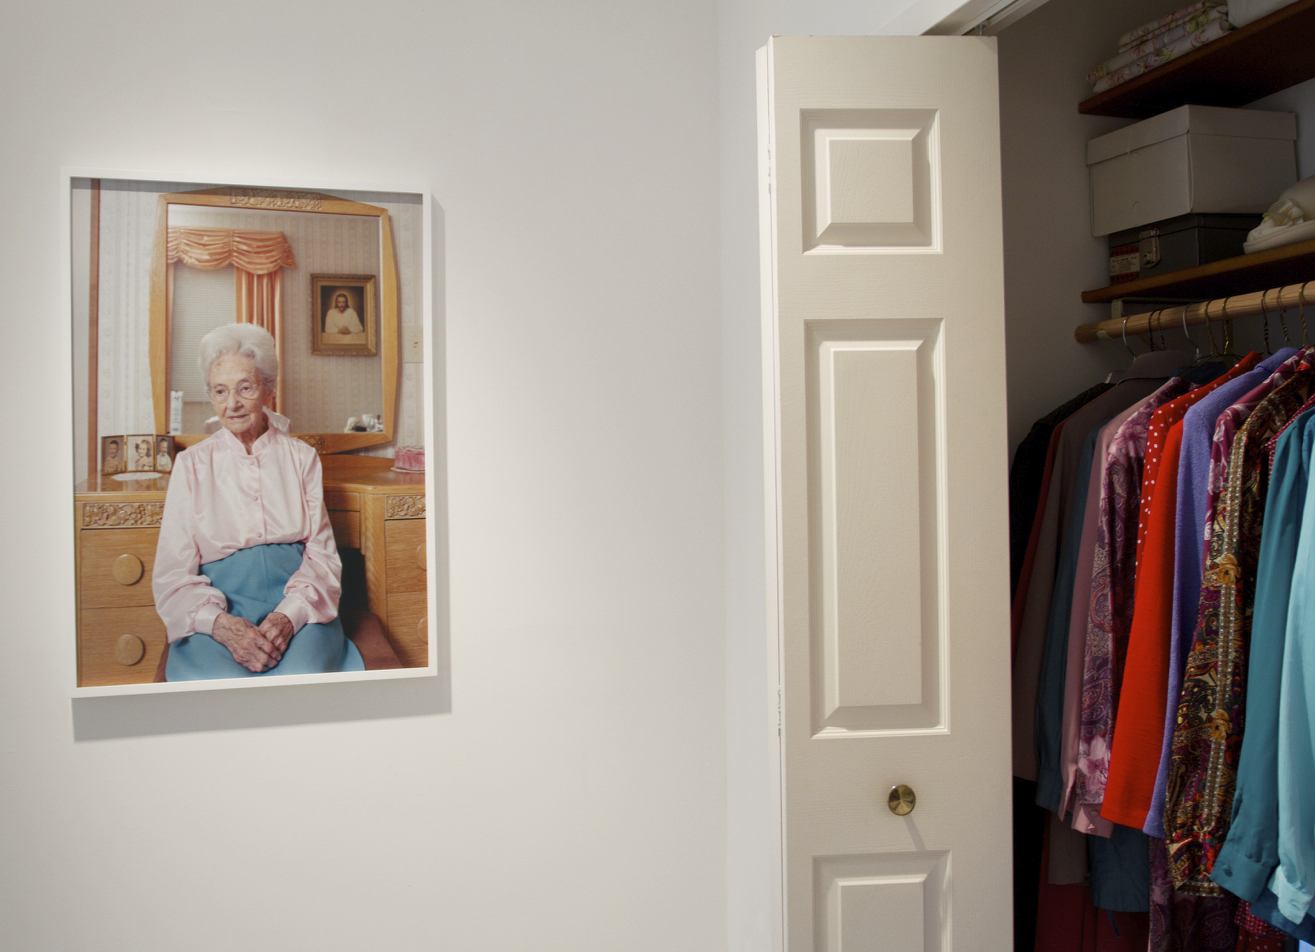 Grandmother's Closet Installation (with sound and scent), Storytelling Exhibition at Andrea Meislin Gallery, 2013